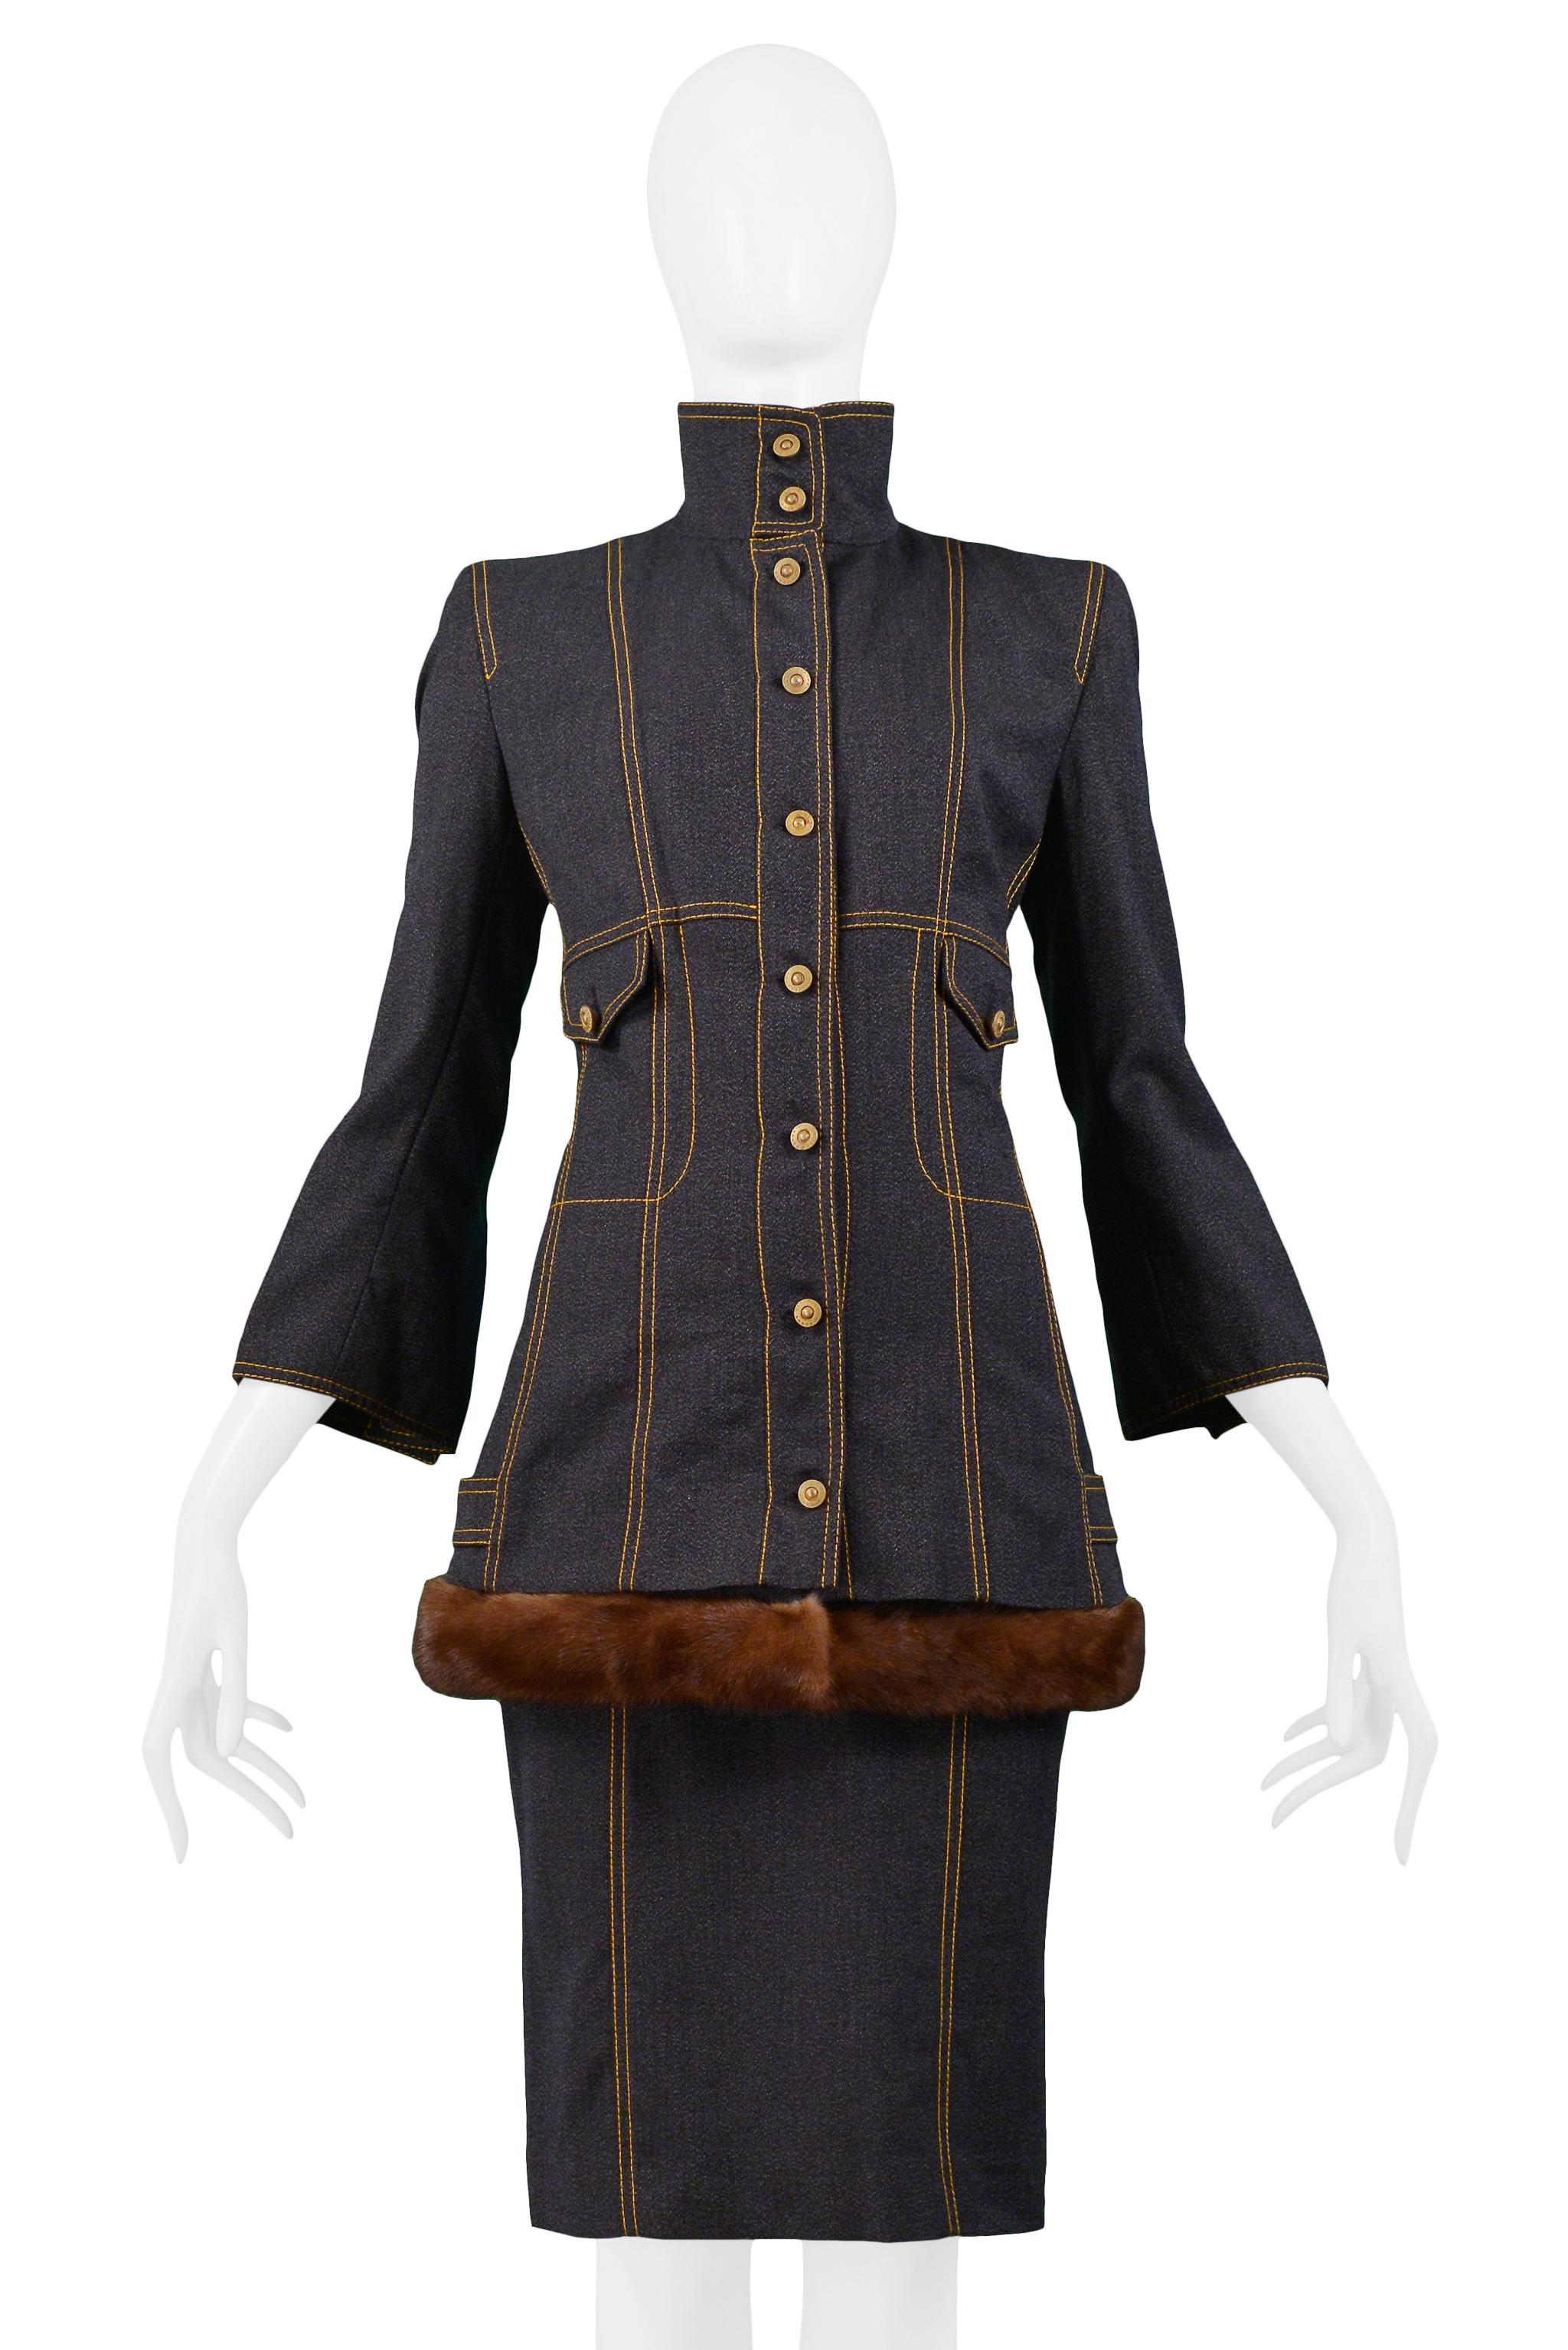 Resurrection is pleased to offer this vintage Gianfranco Ferre ultra-dark denim jacket and skirt ensemble. The hip-length jacket features stand up collar, yellow topstitching details throughout, flap pockets at waist, flared three-quarter length